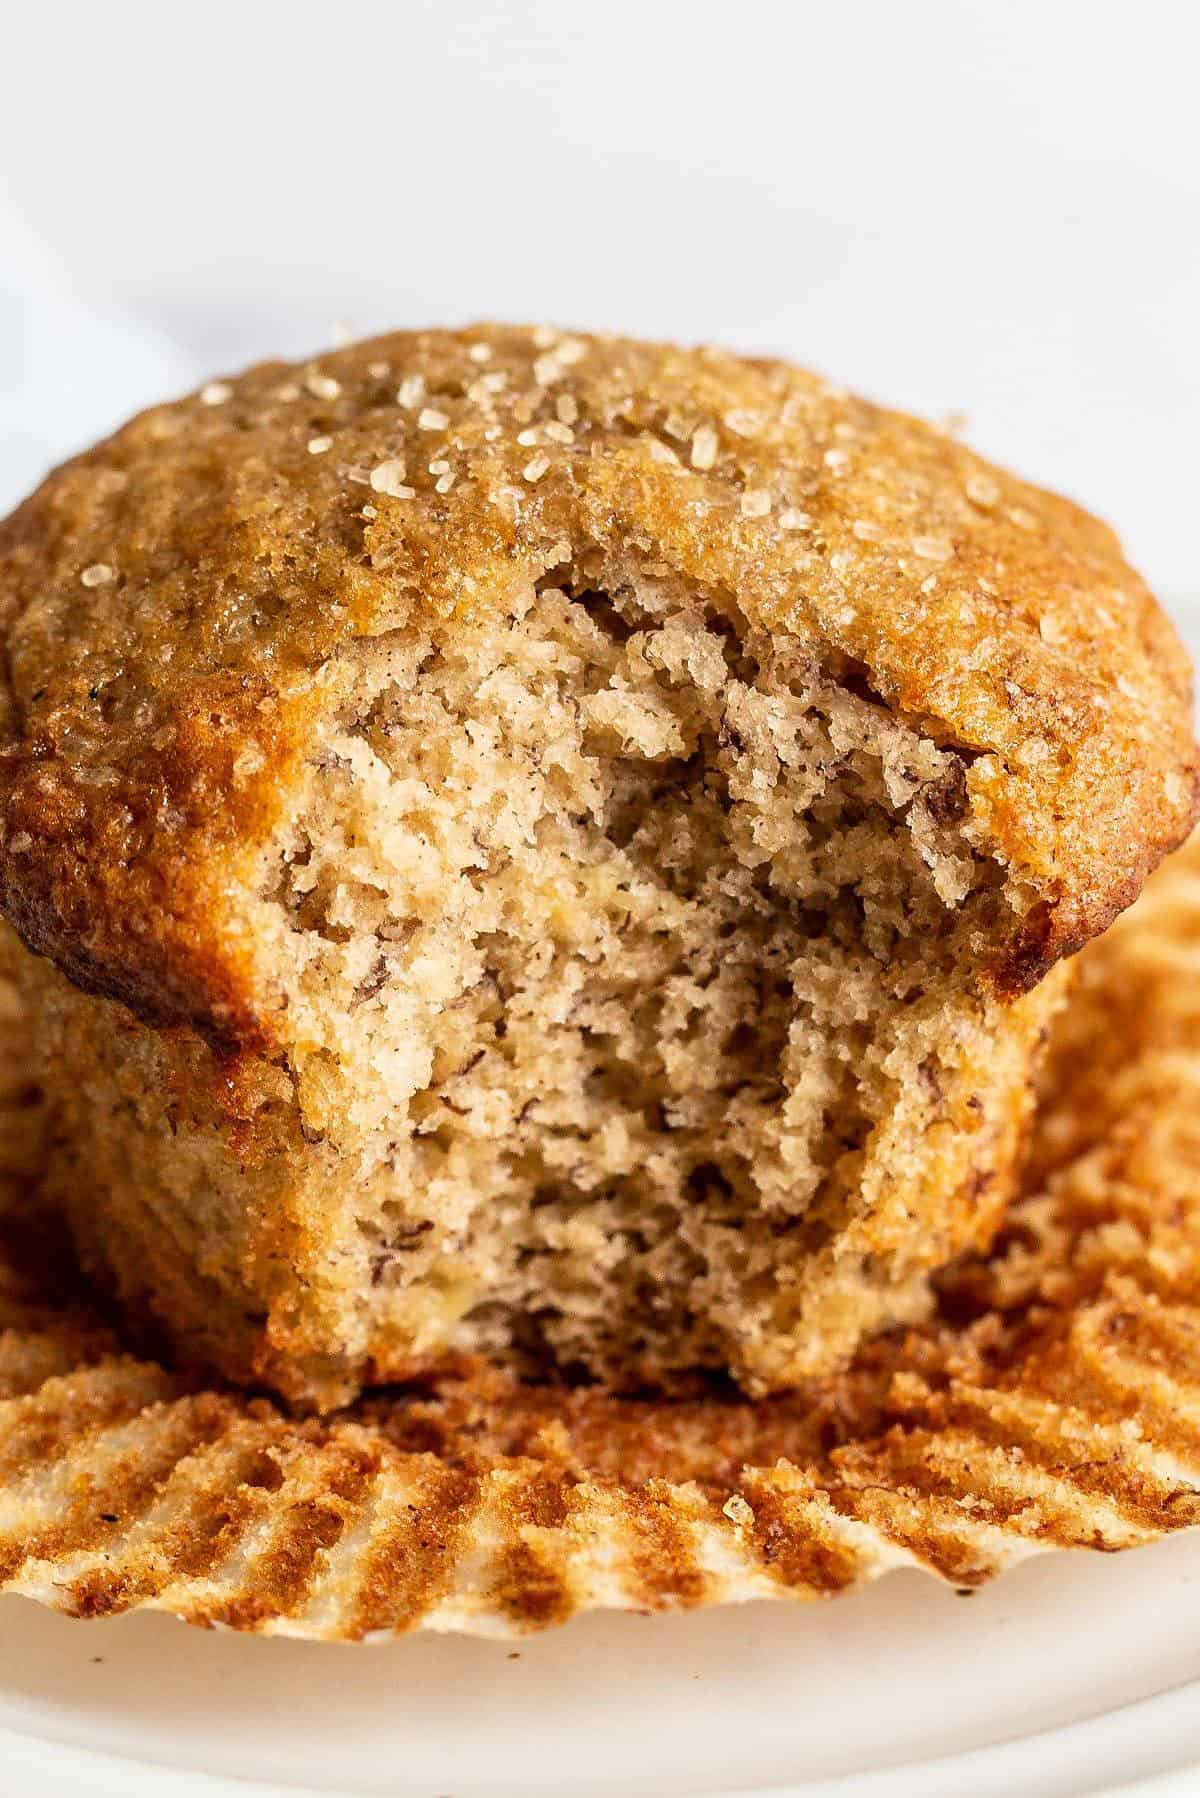  I guarantee you won't be able to resist the banana-y goodness of these muffins.